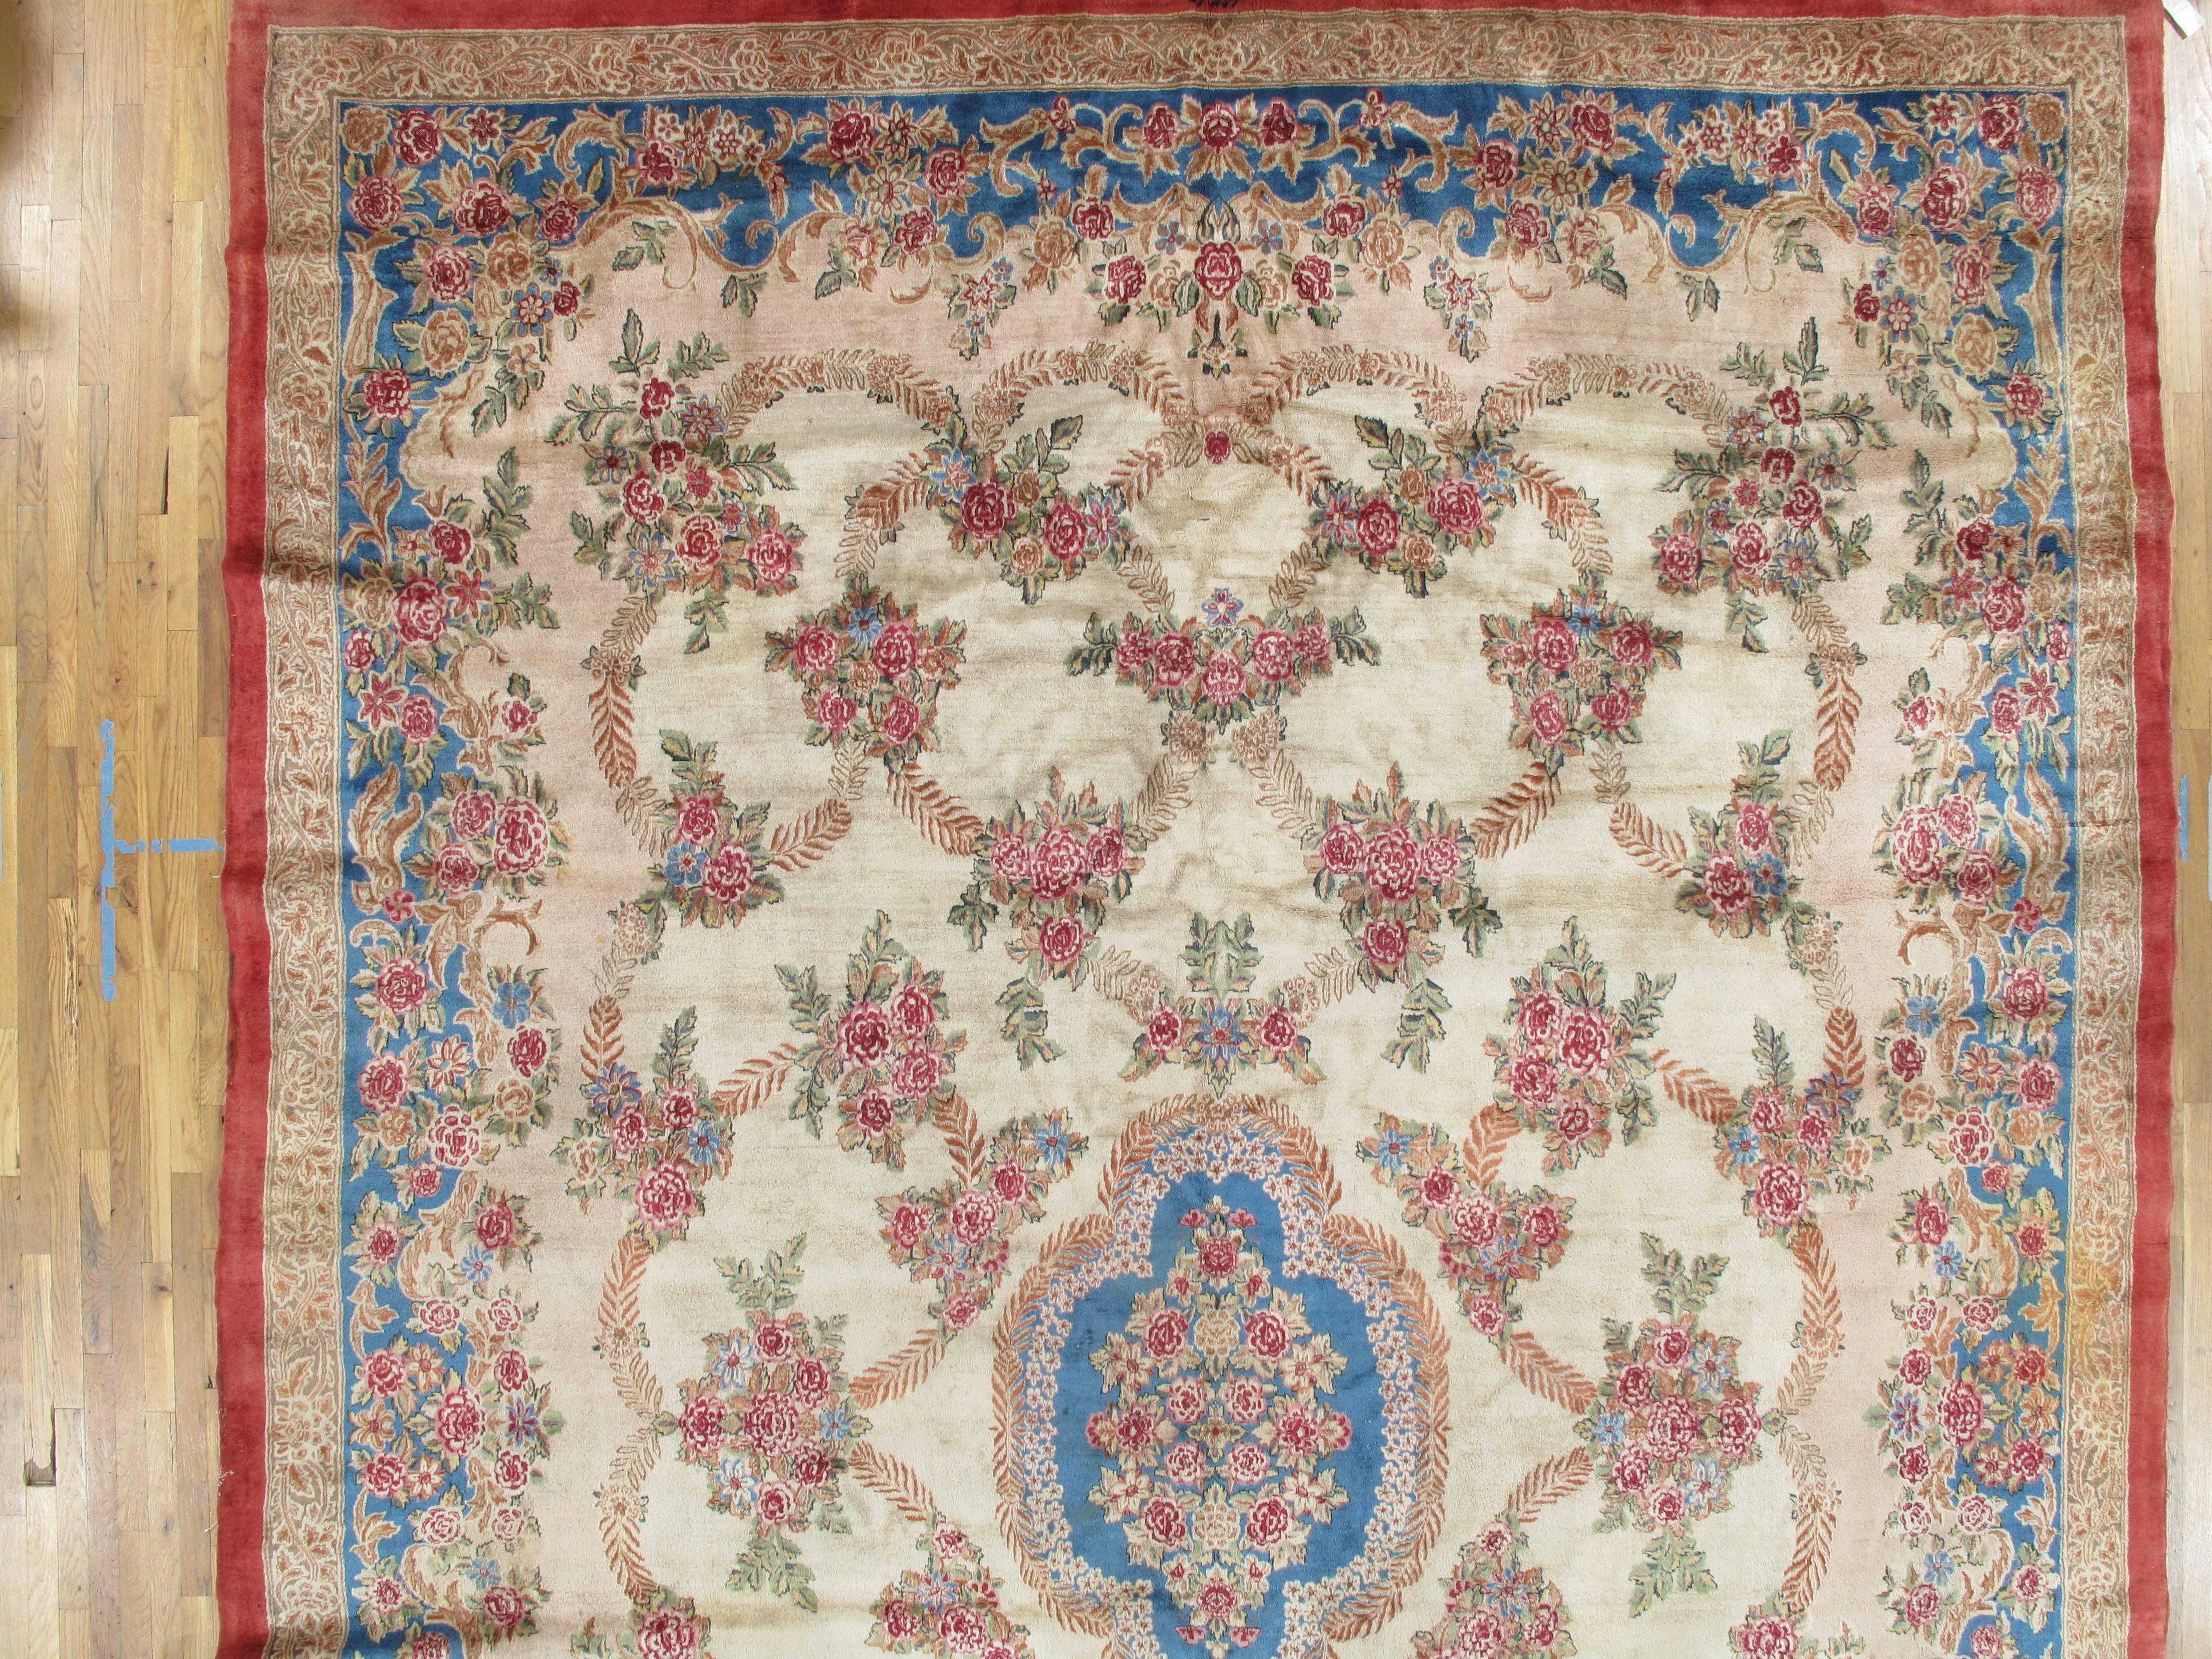 Antique Kerman Carpet, Handmade Persian Rug, Wool Carpet, Pink Red, Green, Ivory In Excellent Condition For Sale In Port Washington, NY